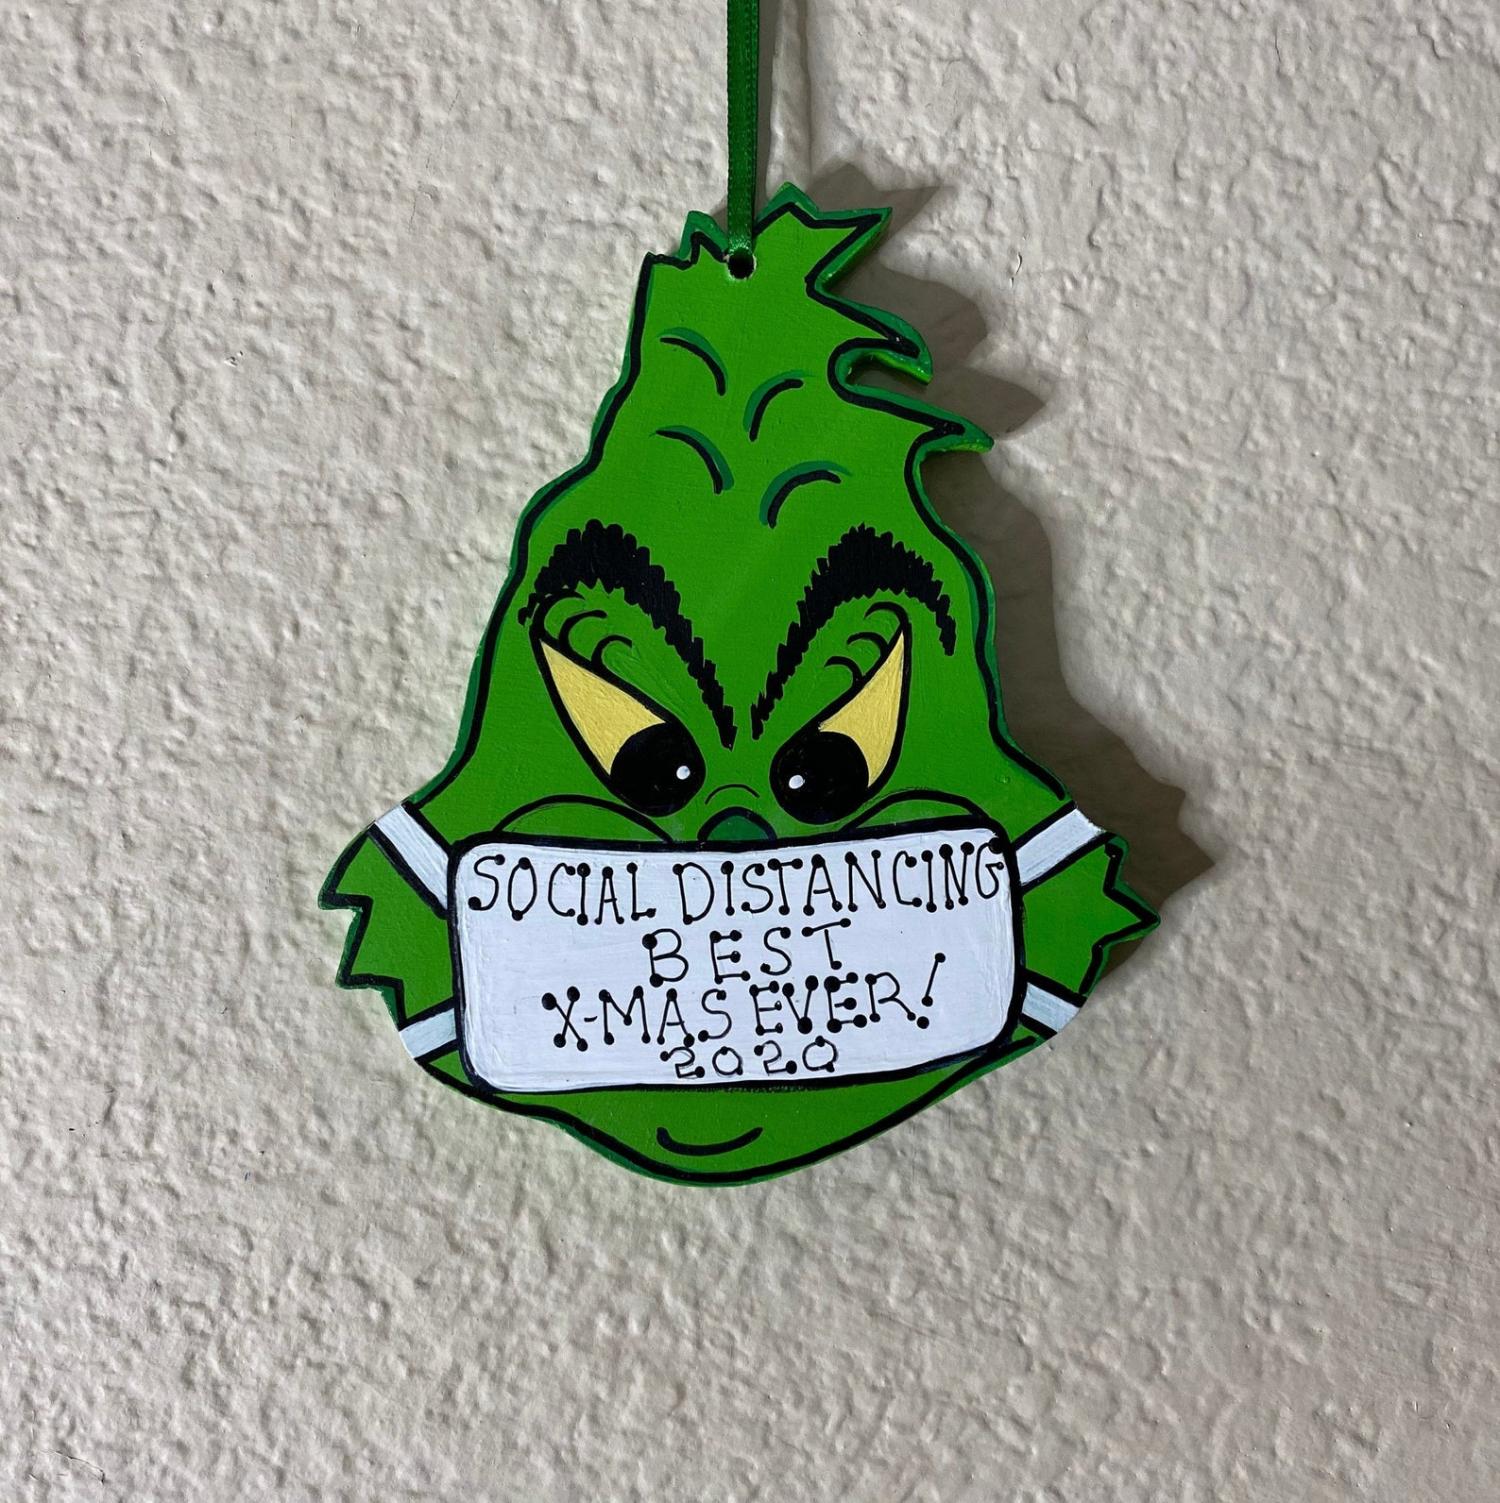 The Grinch The Grinch Social Distancing Best Xmas Ever 2020 Christmas Ornament